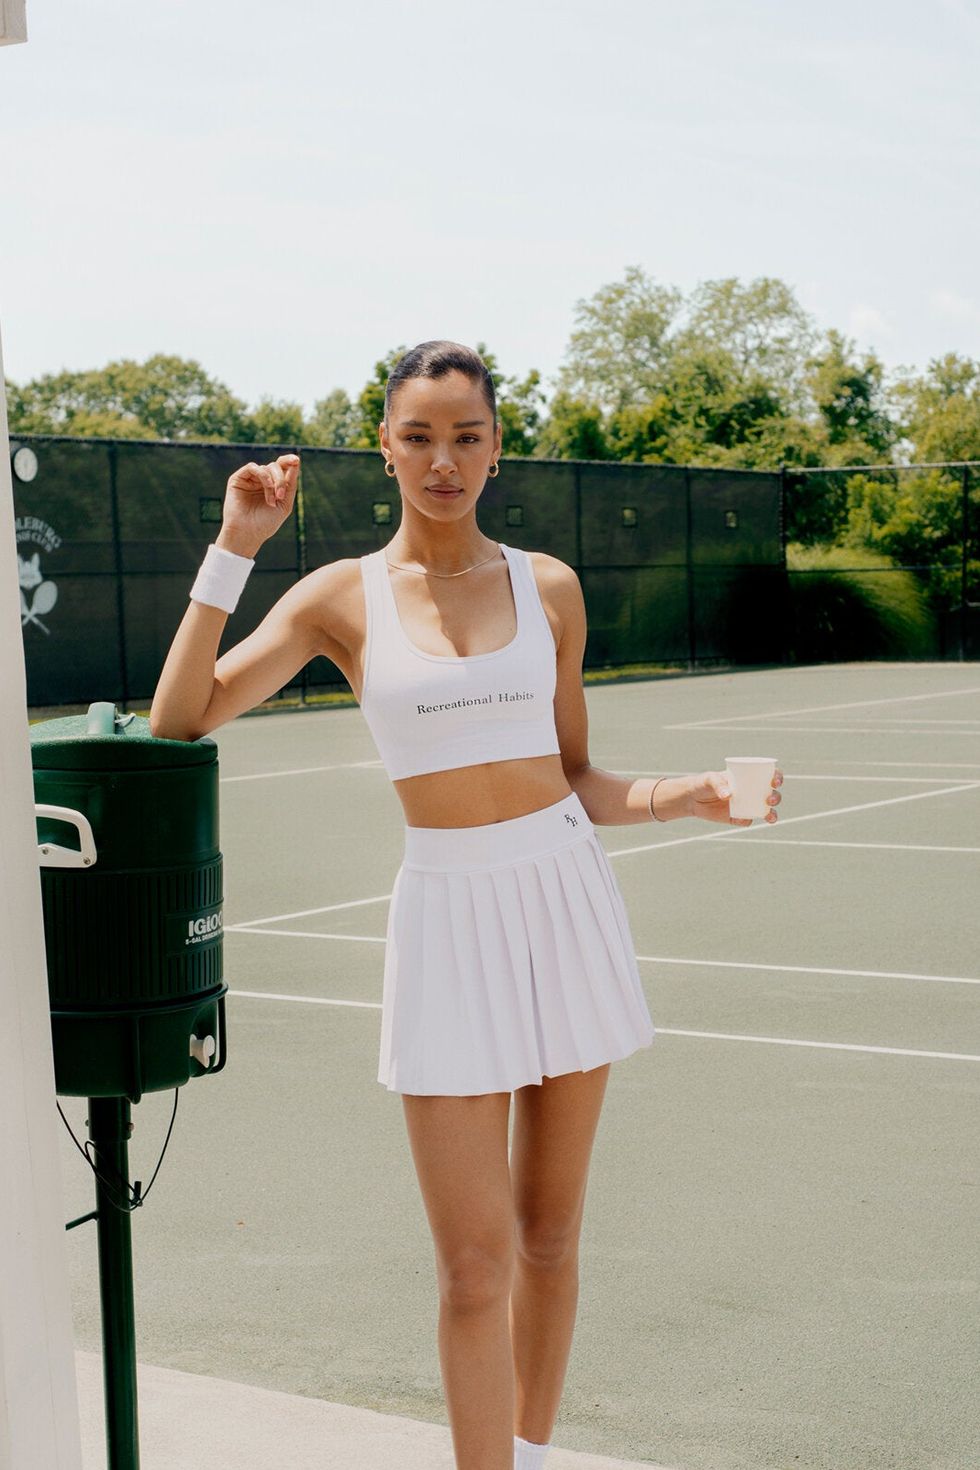 Cute Tennis Outfits and Accessories